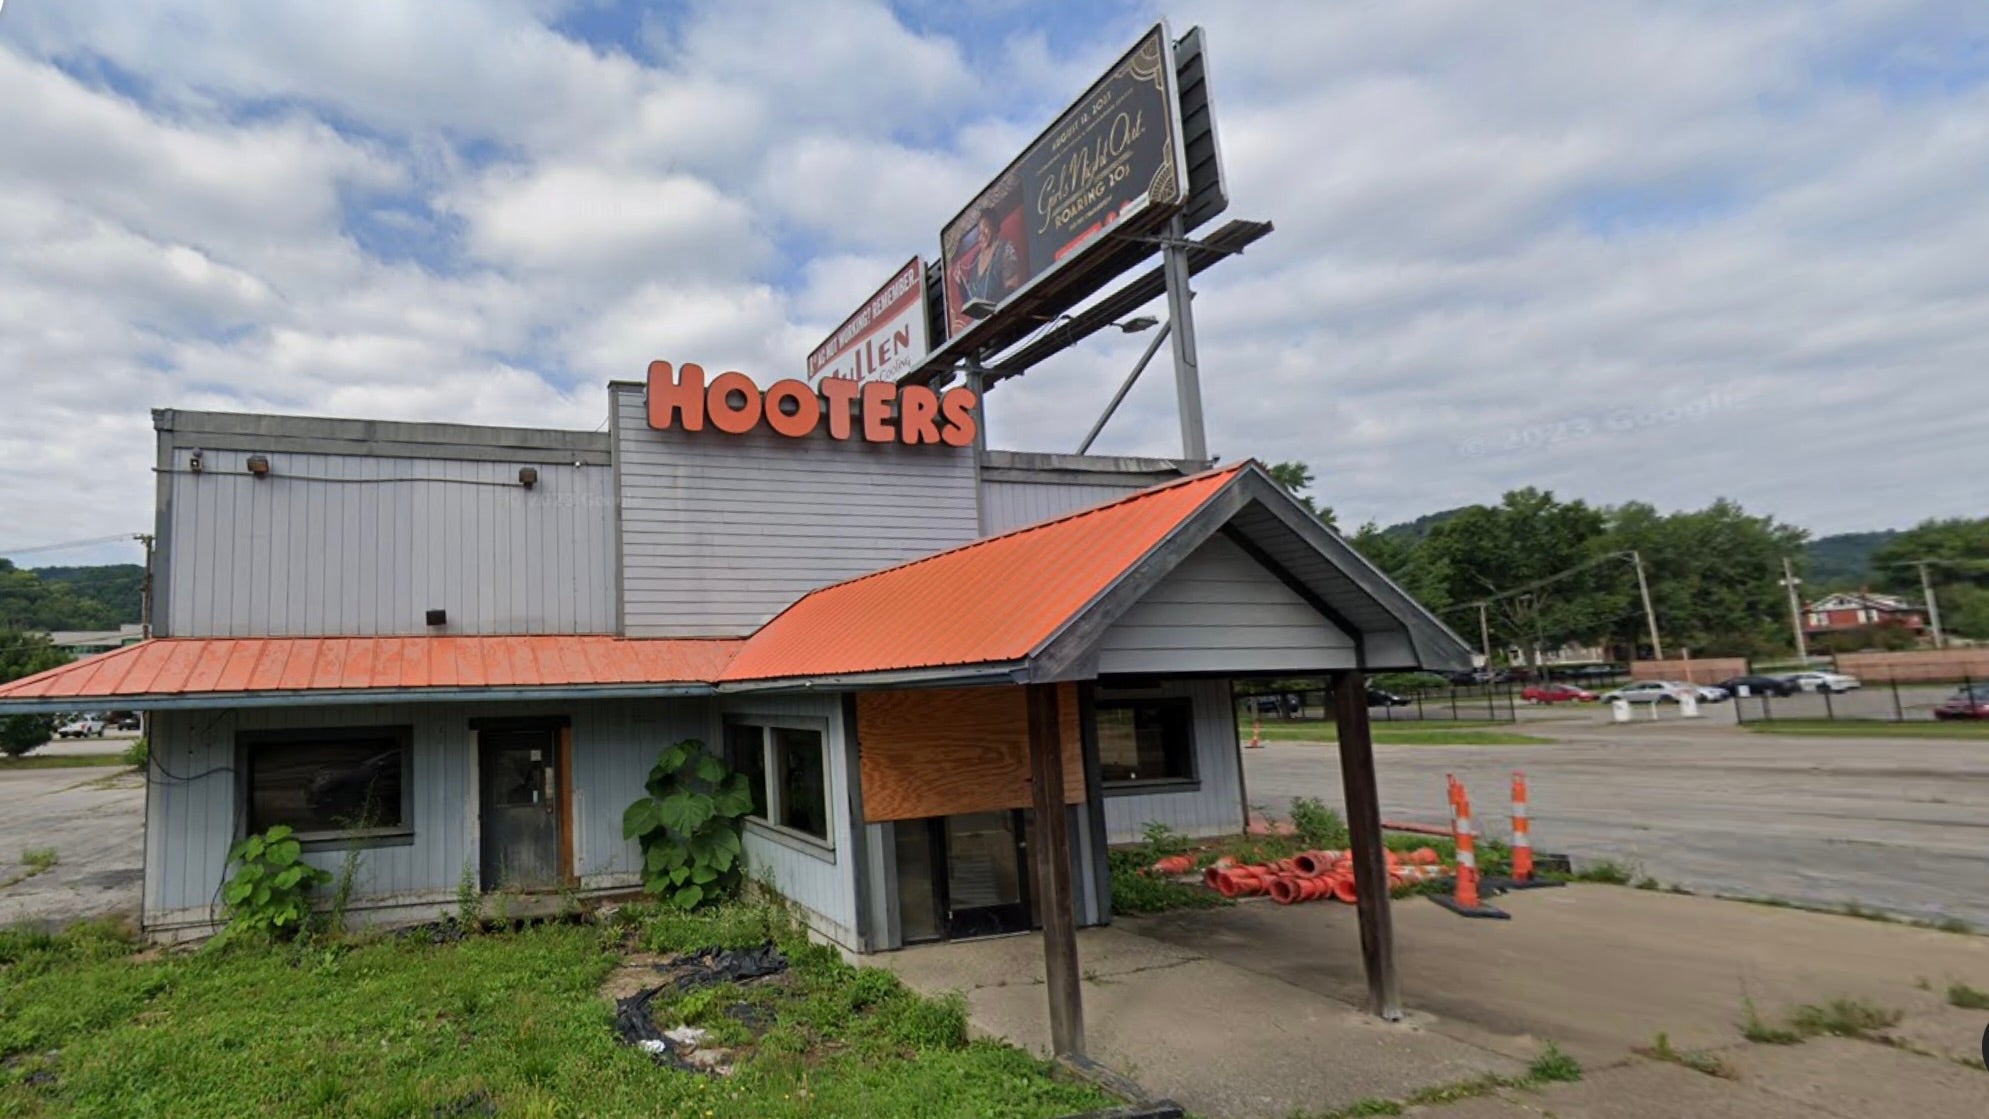 The residents of Charleston, West Virginia are holding a candlelit vigil ahead of the demolition of their local Hooters.